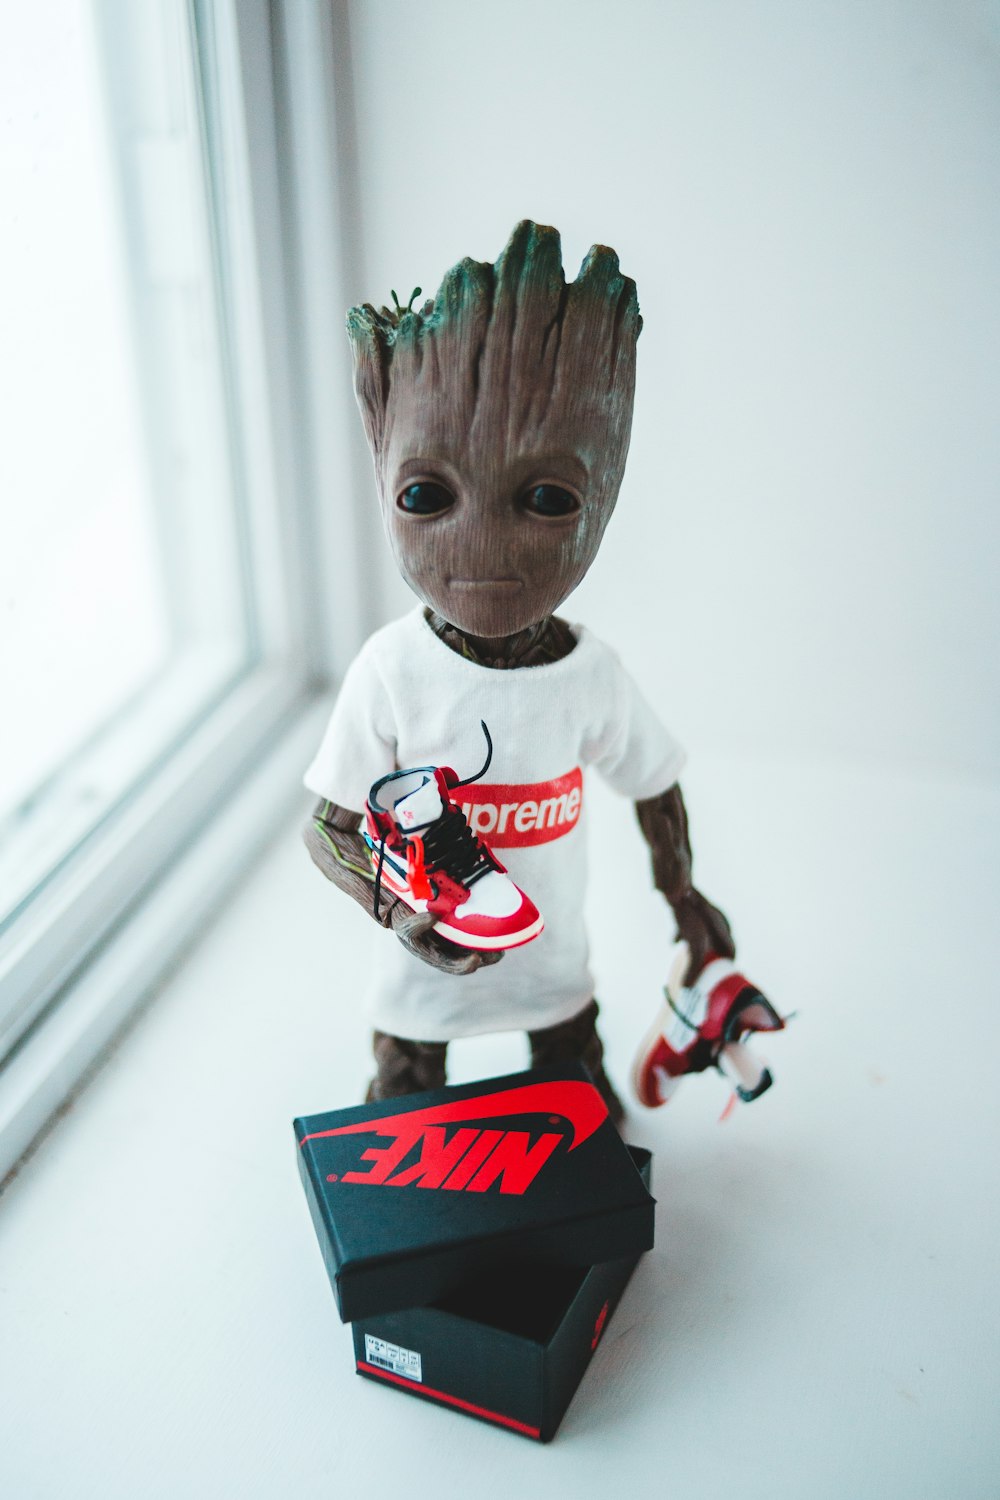 Baby Groot Pictures | Download Free Images on Unsplash